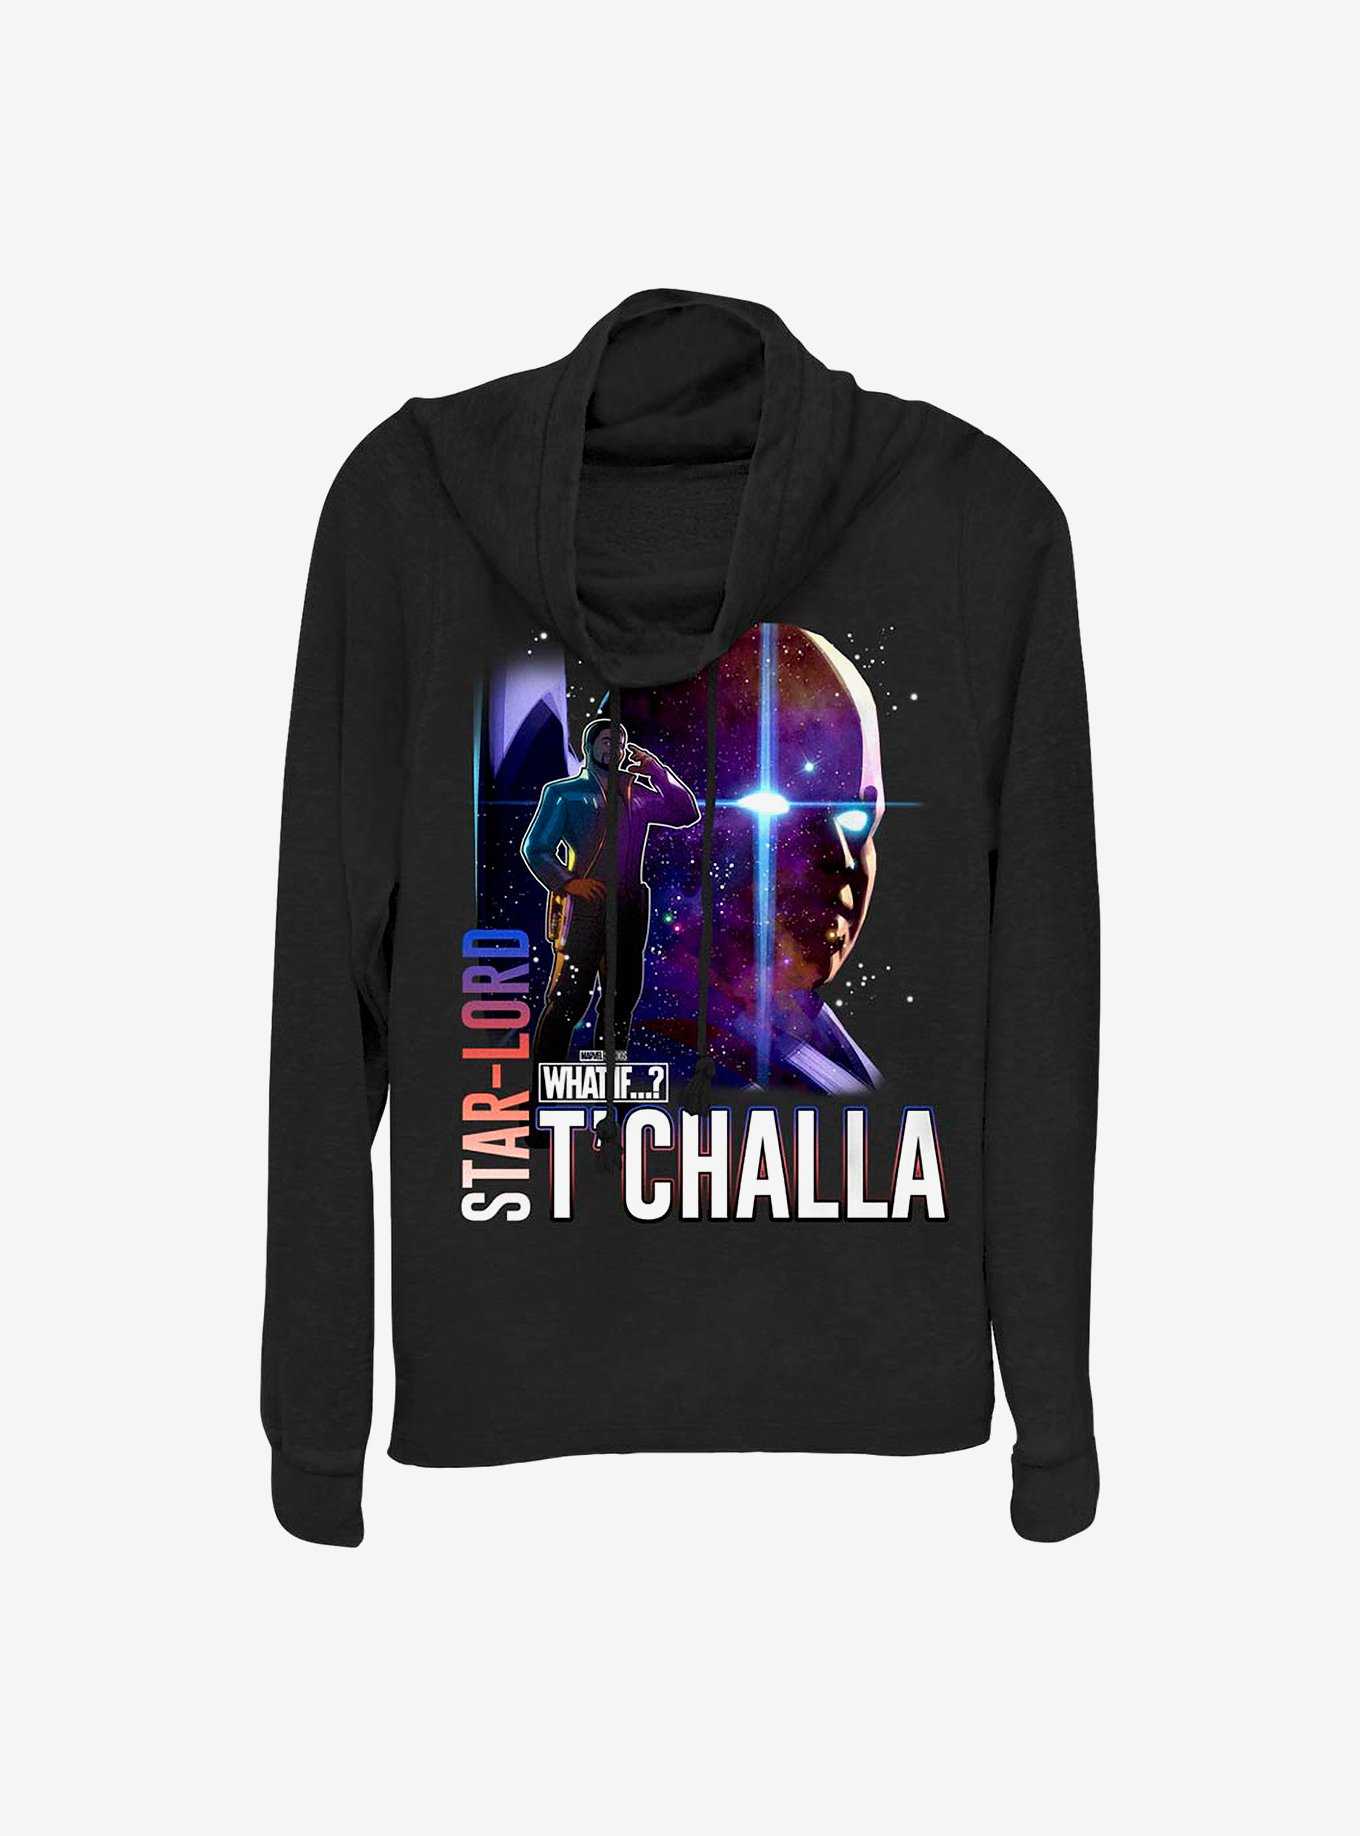 Marvel What If...? Star-Lord Watcher T'Challa Cowlneck Long-Sleeve Girls Top, , hi-res